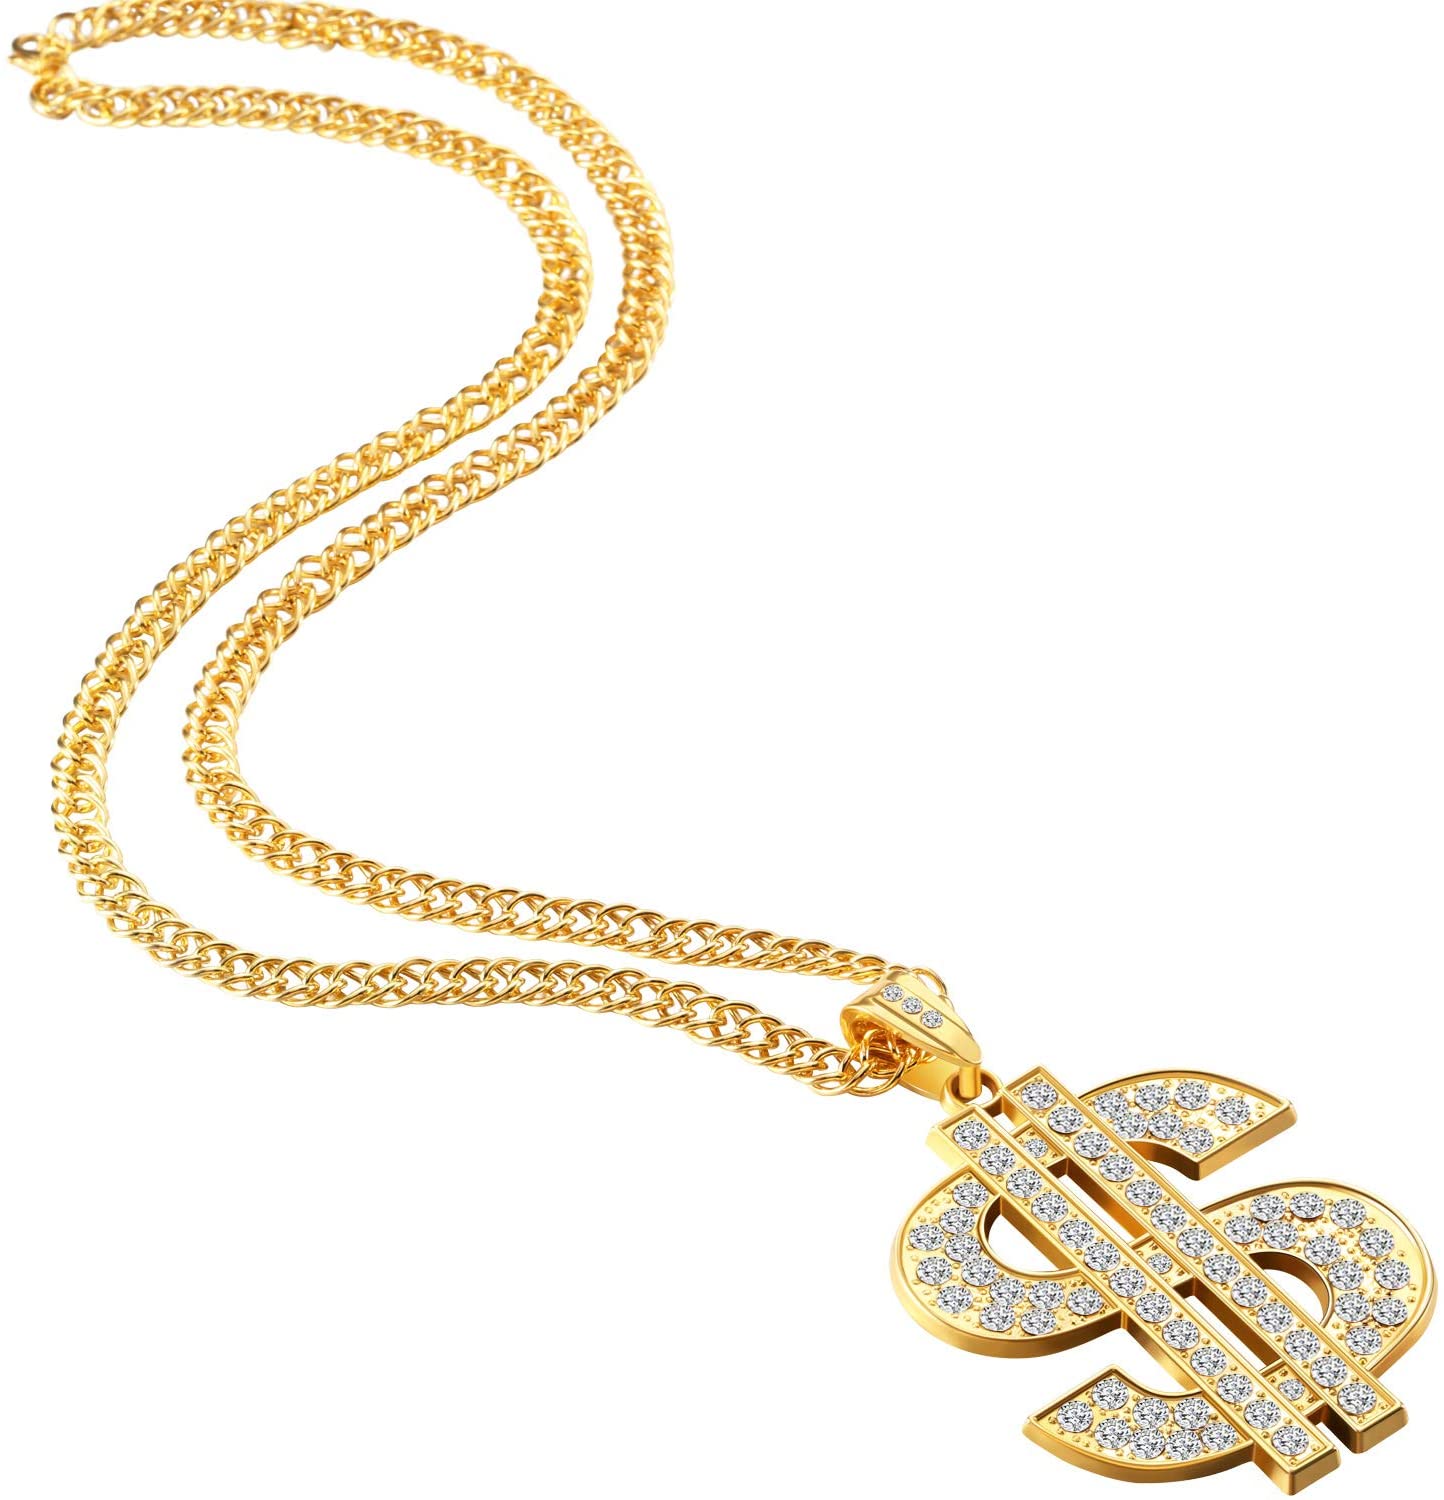 4 Pieces Gold Plated Chain Dollar Necklace for Men with Dollar Sign